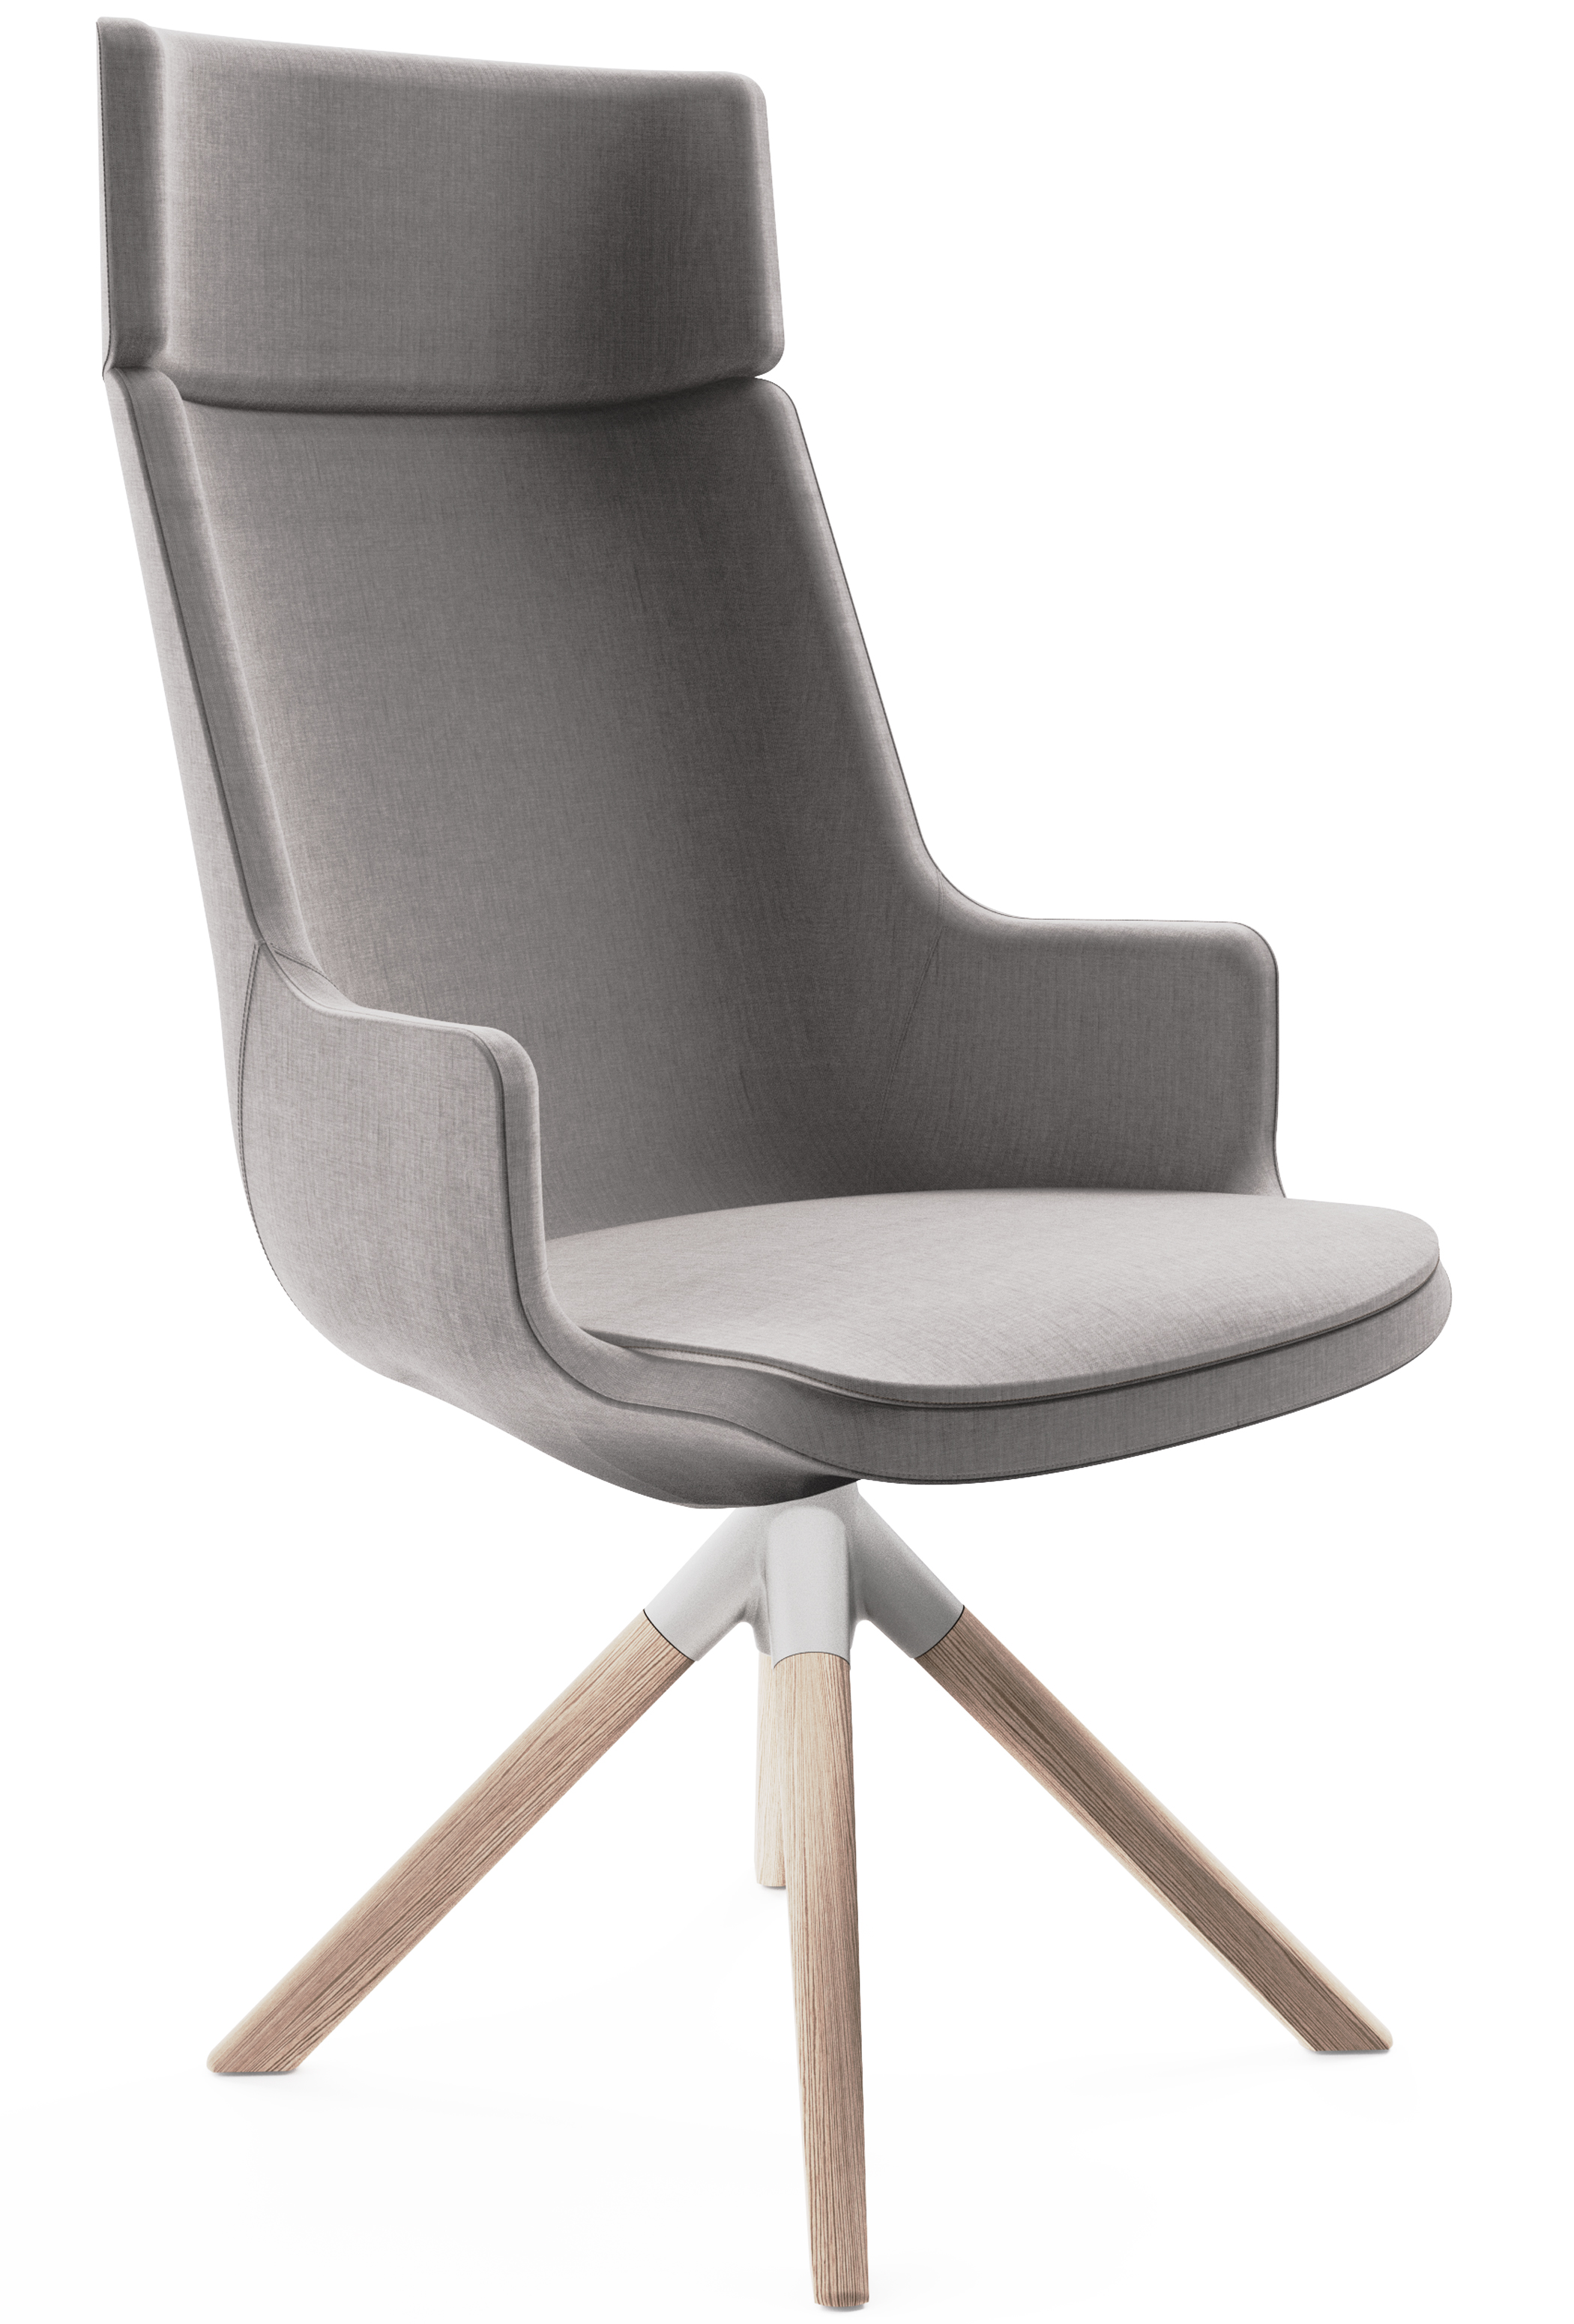 WS - Contour chair - High, 4 star timber base (Front angle)